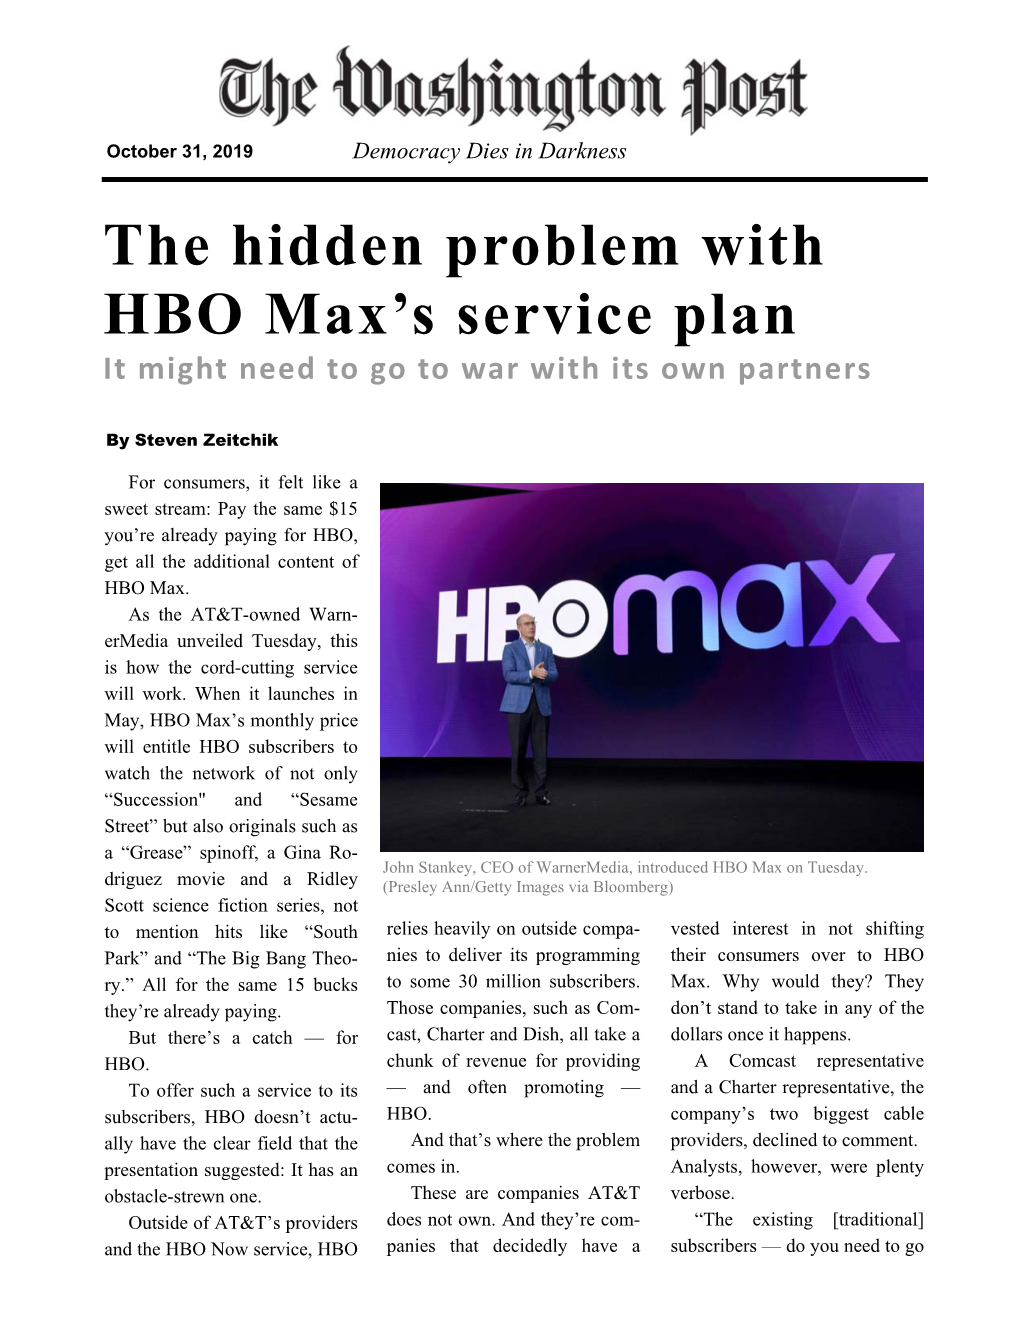 The Hidden Problem with HBO Max's Service Plan Washington